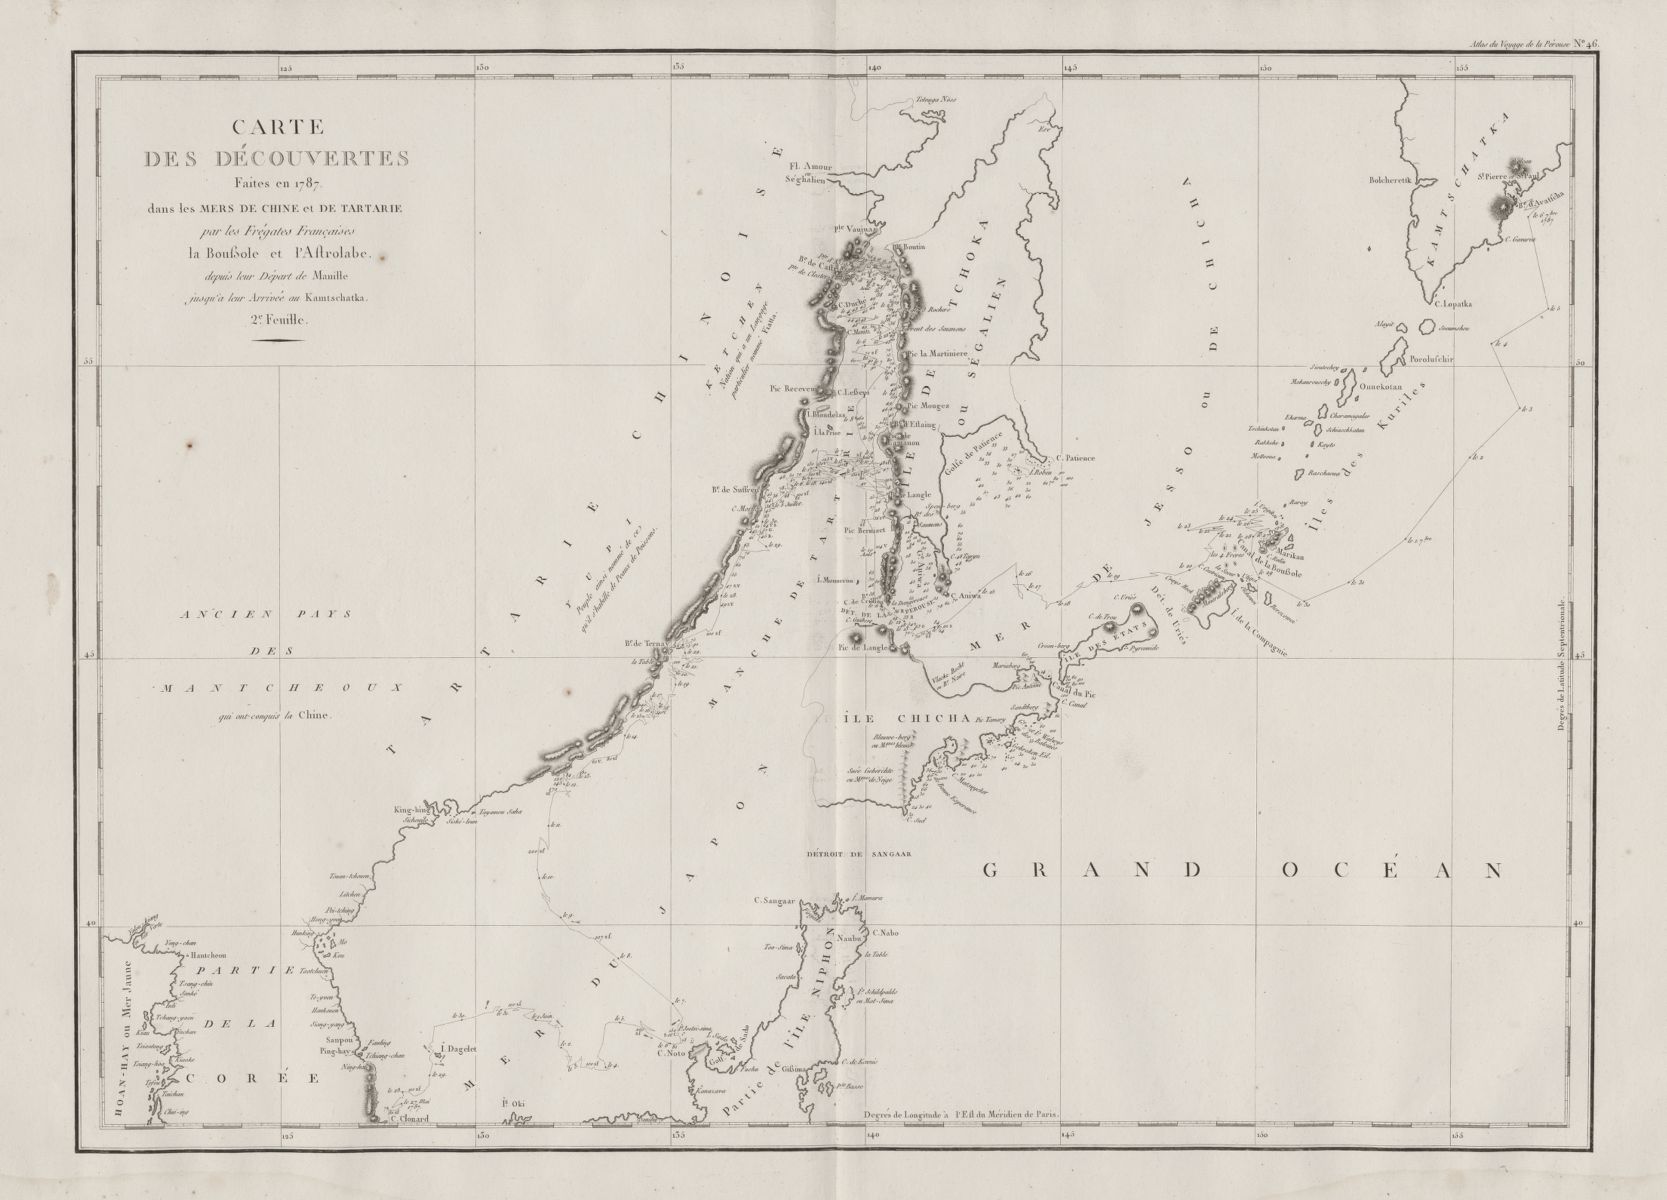 Jean-François de Galaup La Pérouse, Chart of the Discoveries Made in 1787, in the Seas of China and Tartary, by the Boussole and Astrolabe, Map 46 (1797). MacLean Collection, MC26569